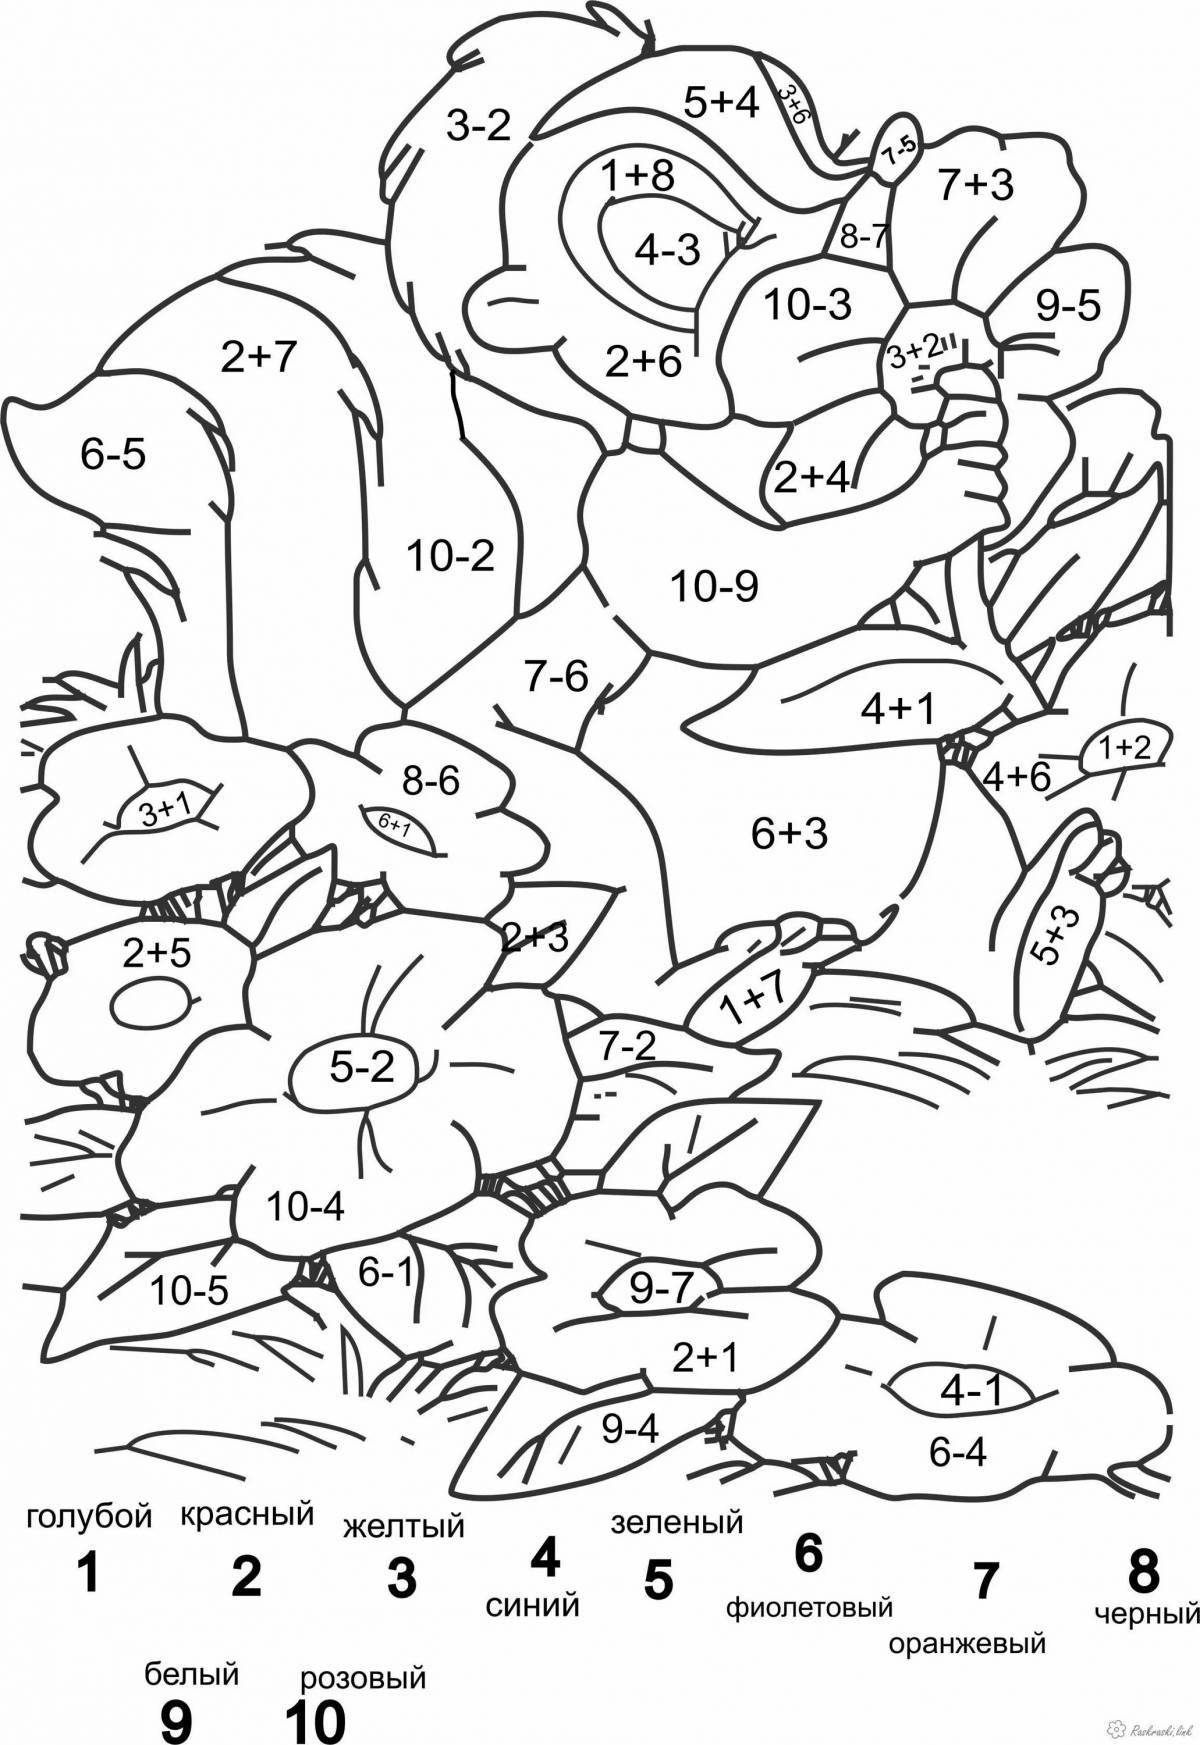 Intriguing coloring by numbers for children 6-7 years old